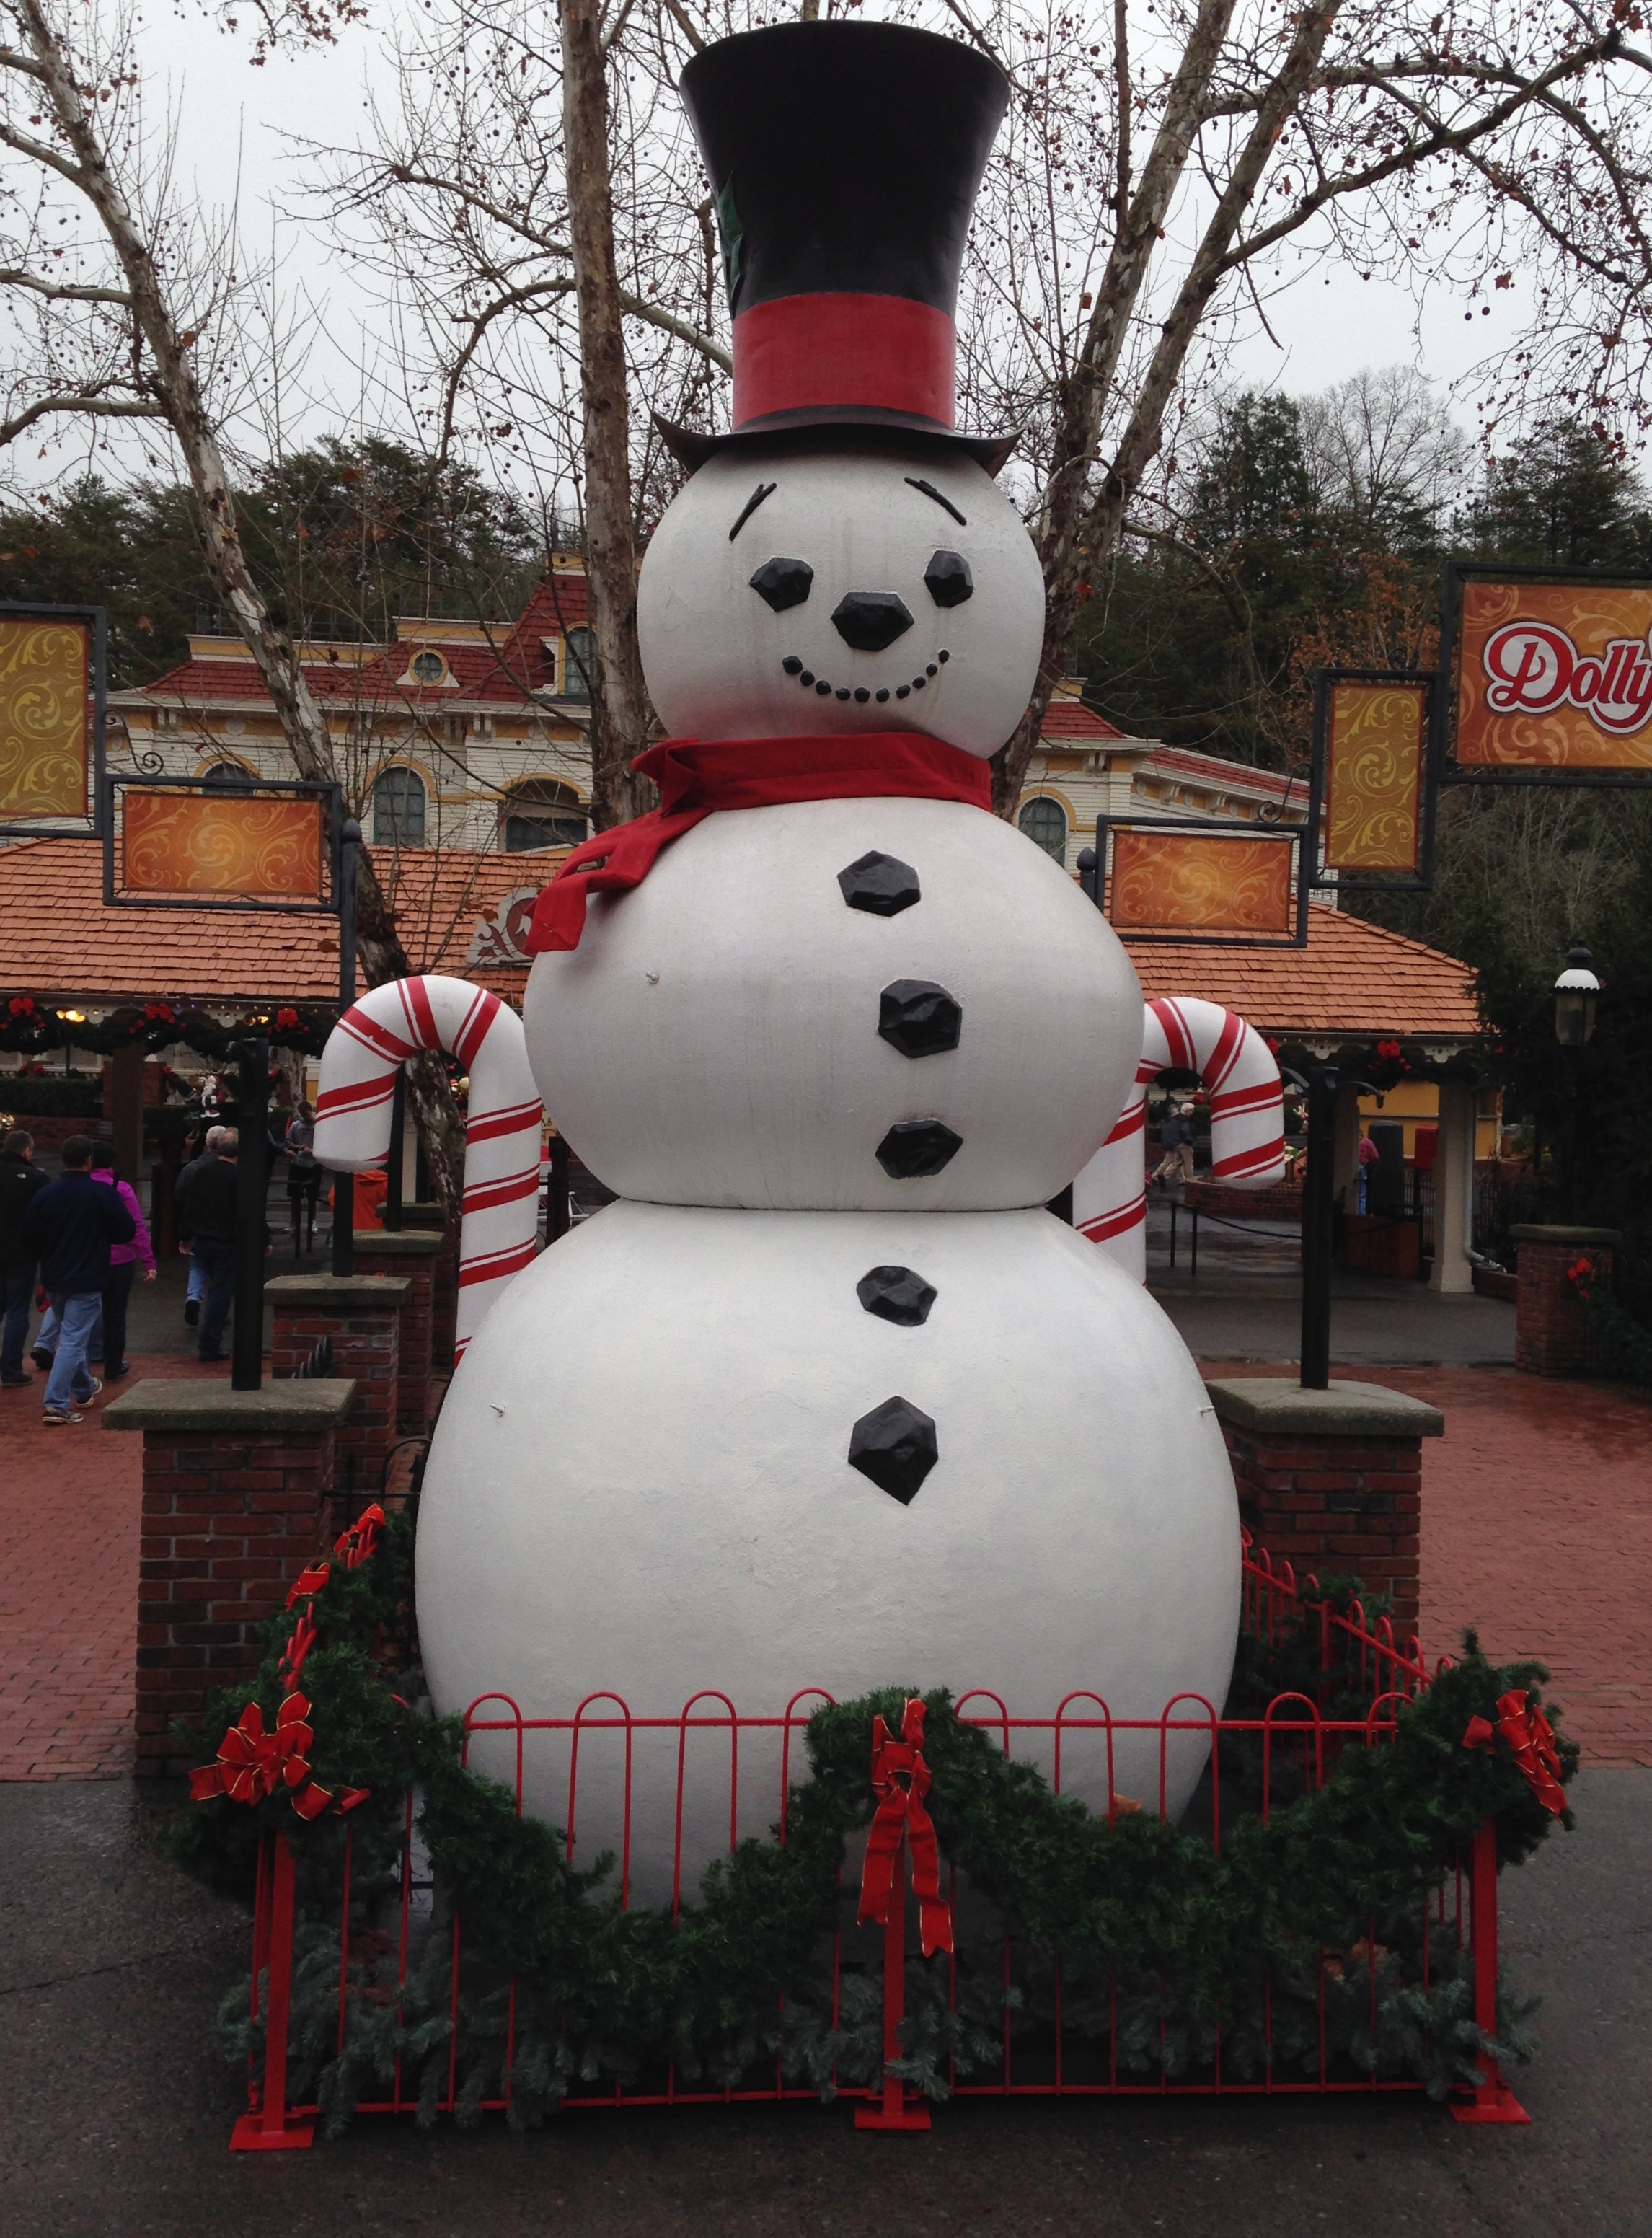 Dollywood - Snowman that greets you as you arrive - Pigeon Forge